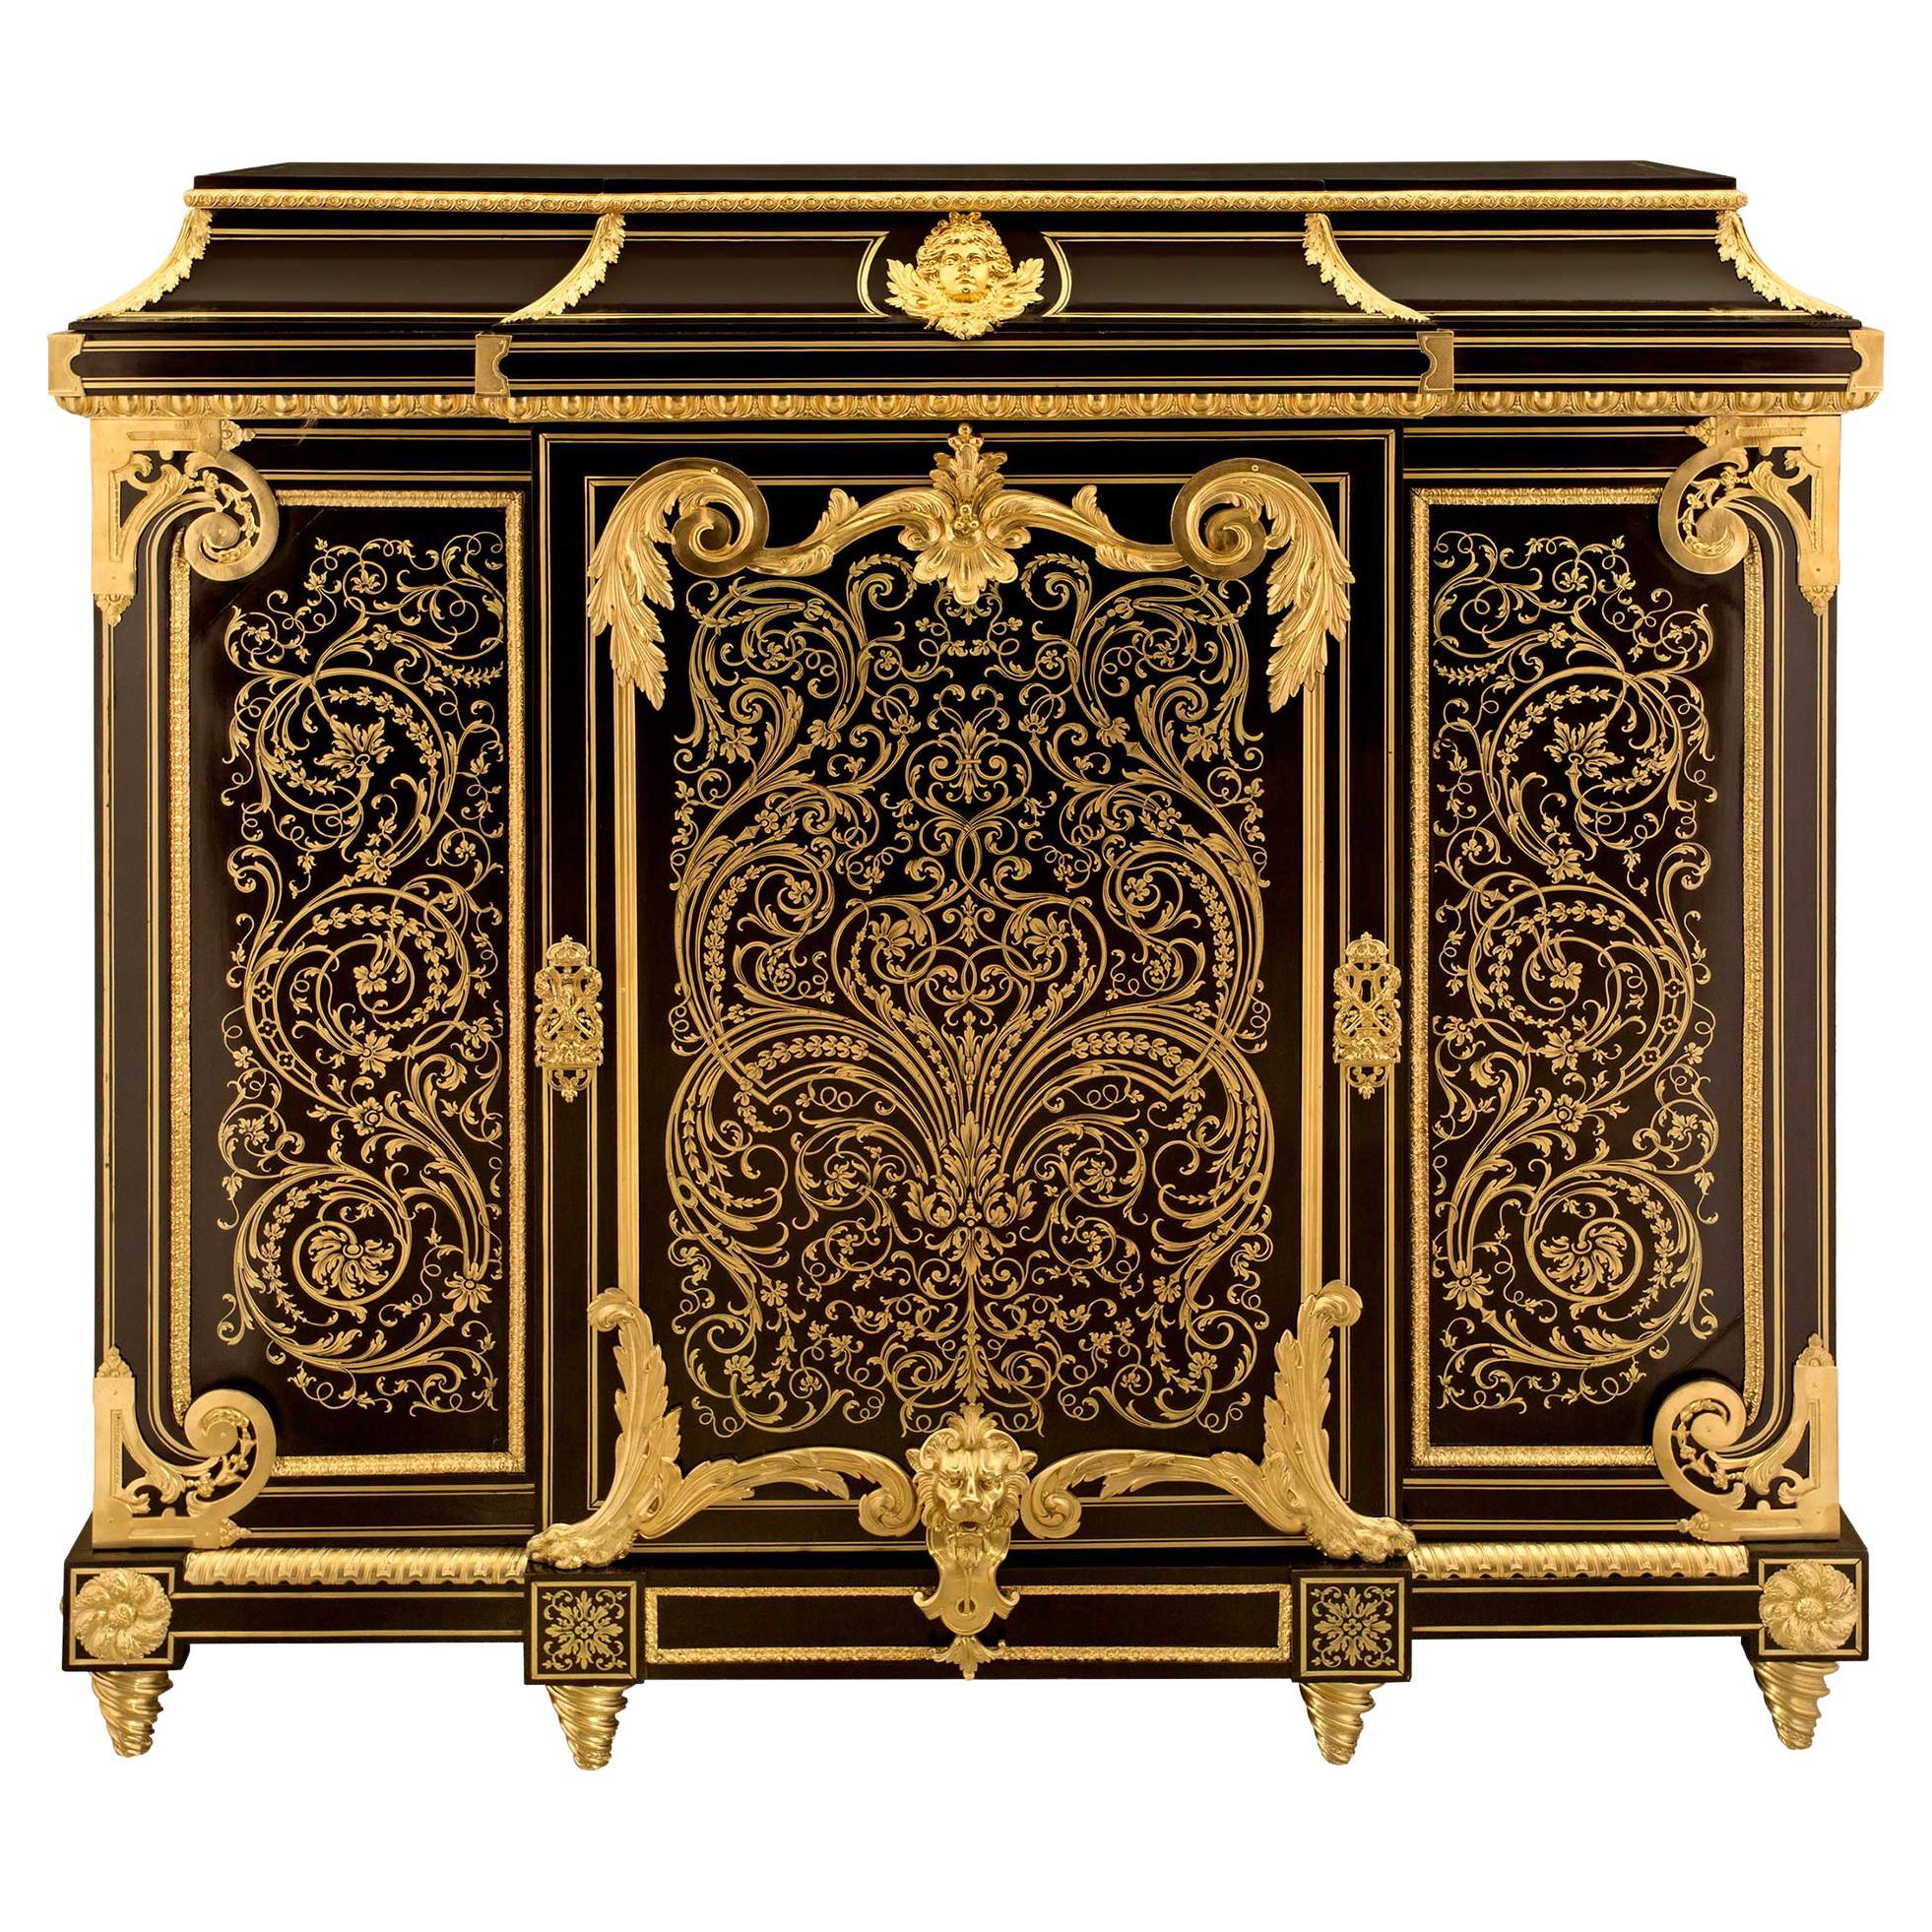 French 19th Century Napoleon III Period Boulle Cabinet À Hauteur D’Appui For Sale